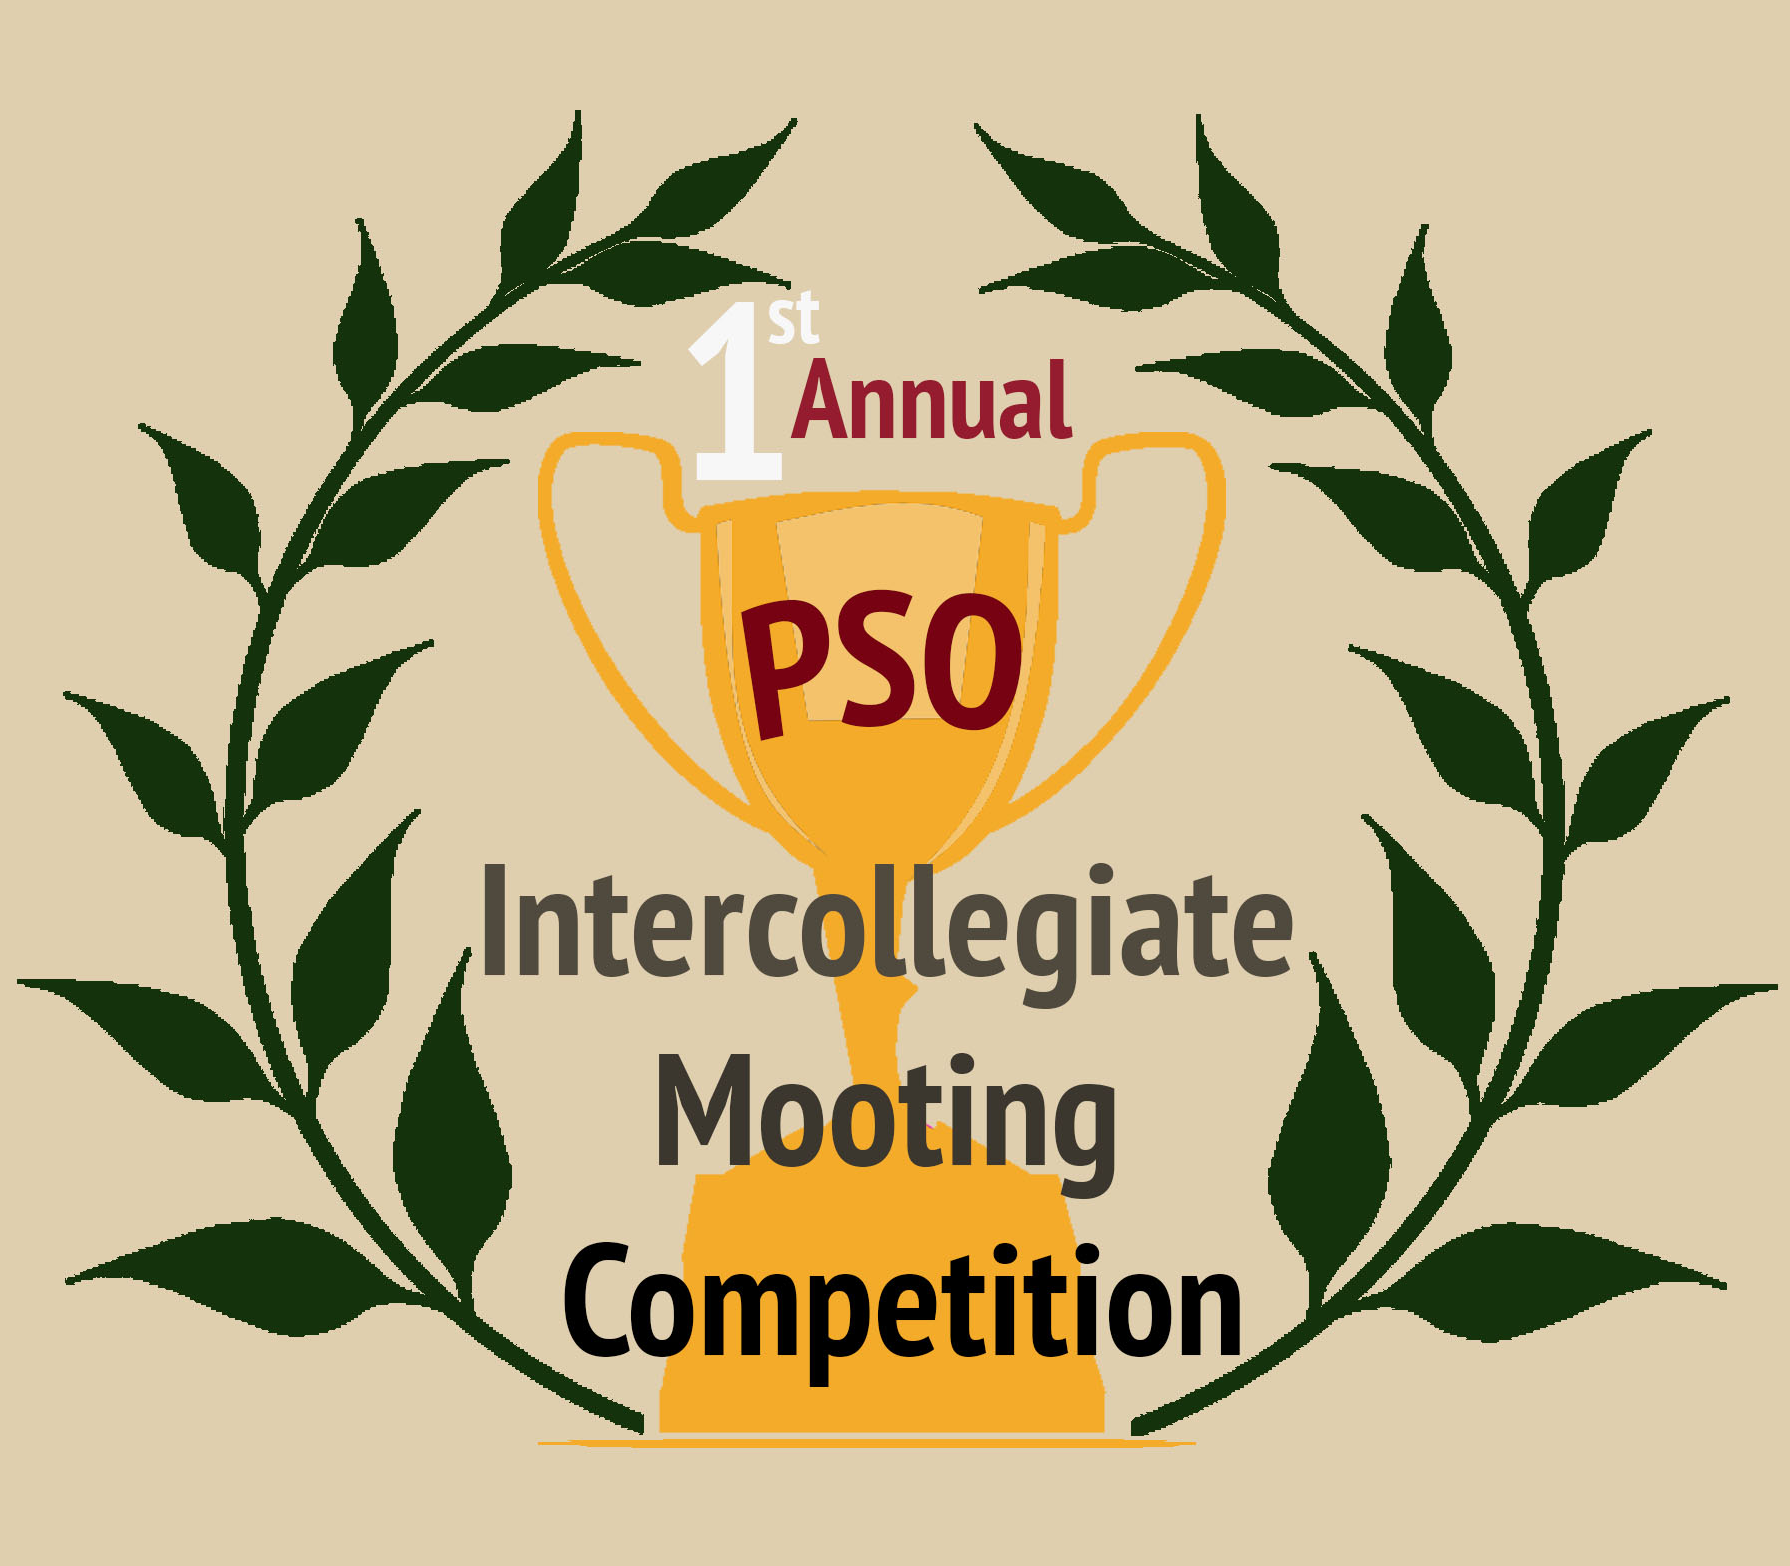 The 2013 Paralegal Society of Ontario Intercollegiate Competition